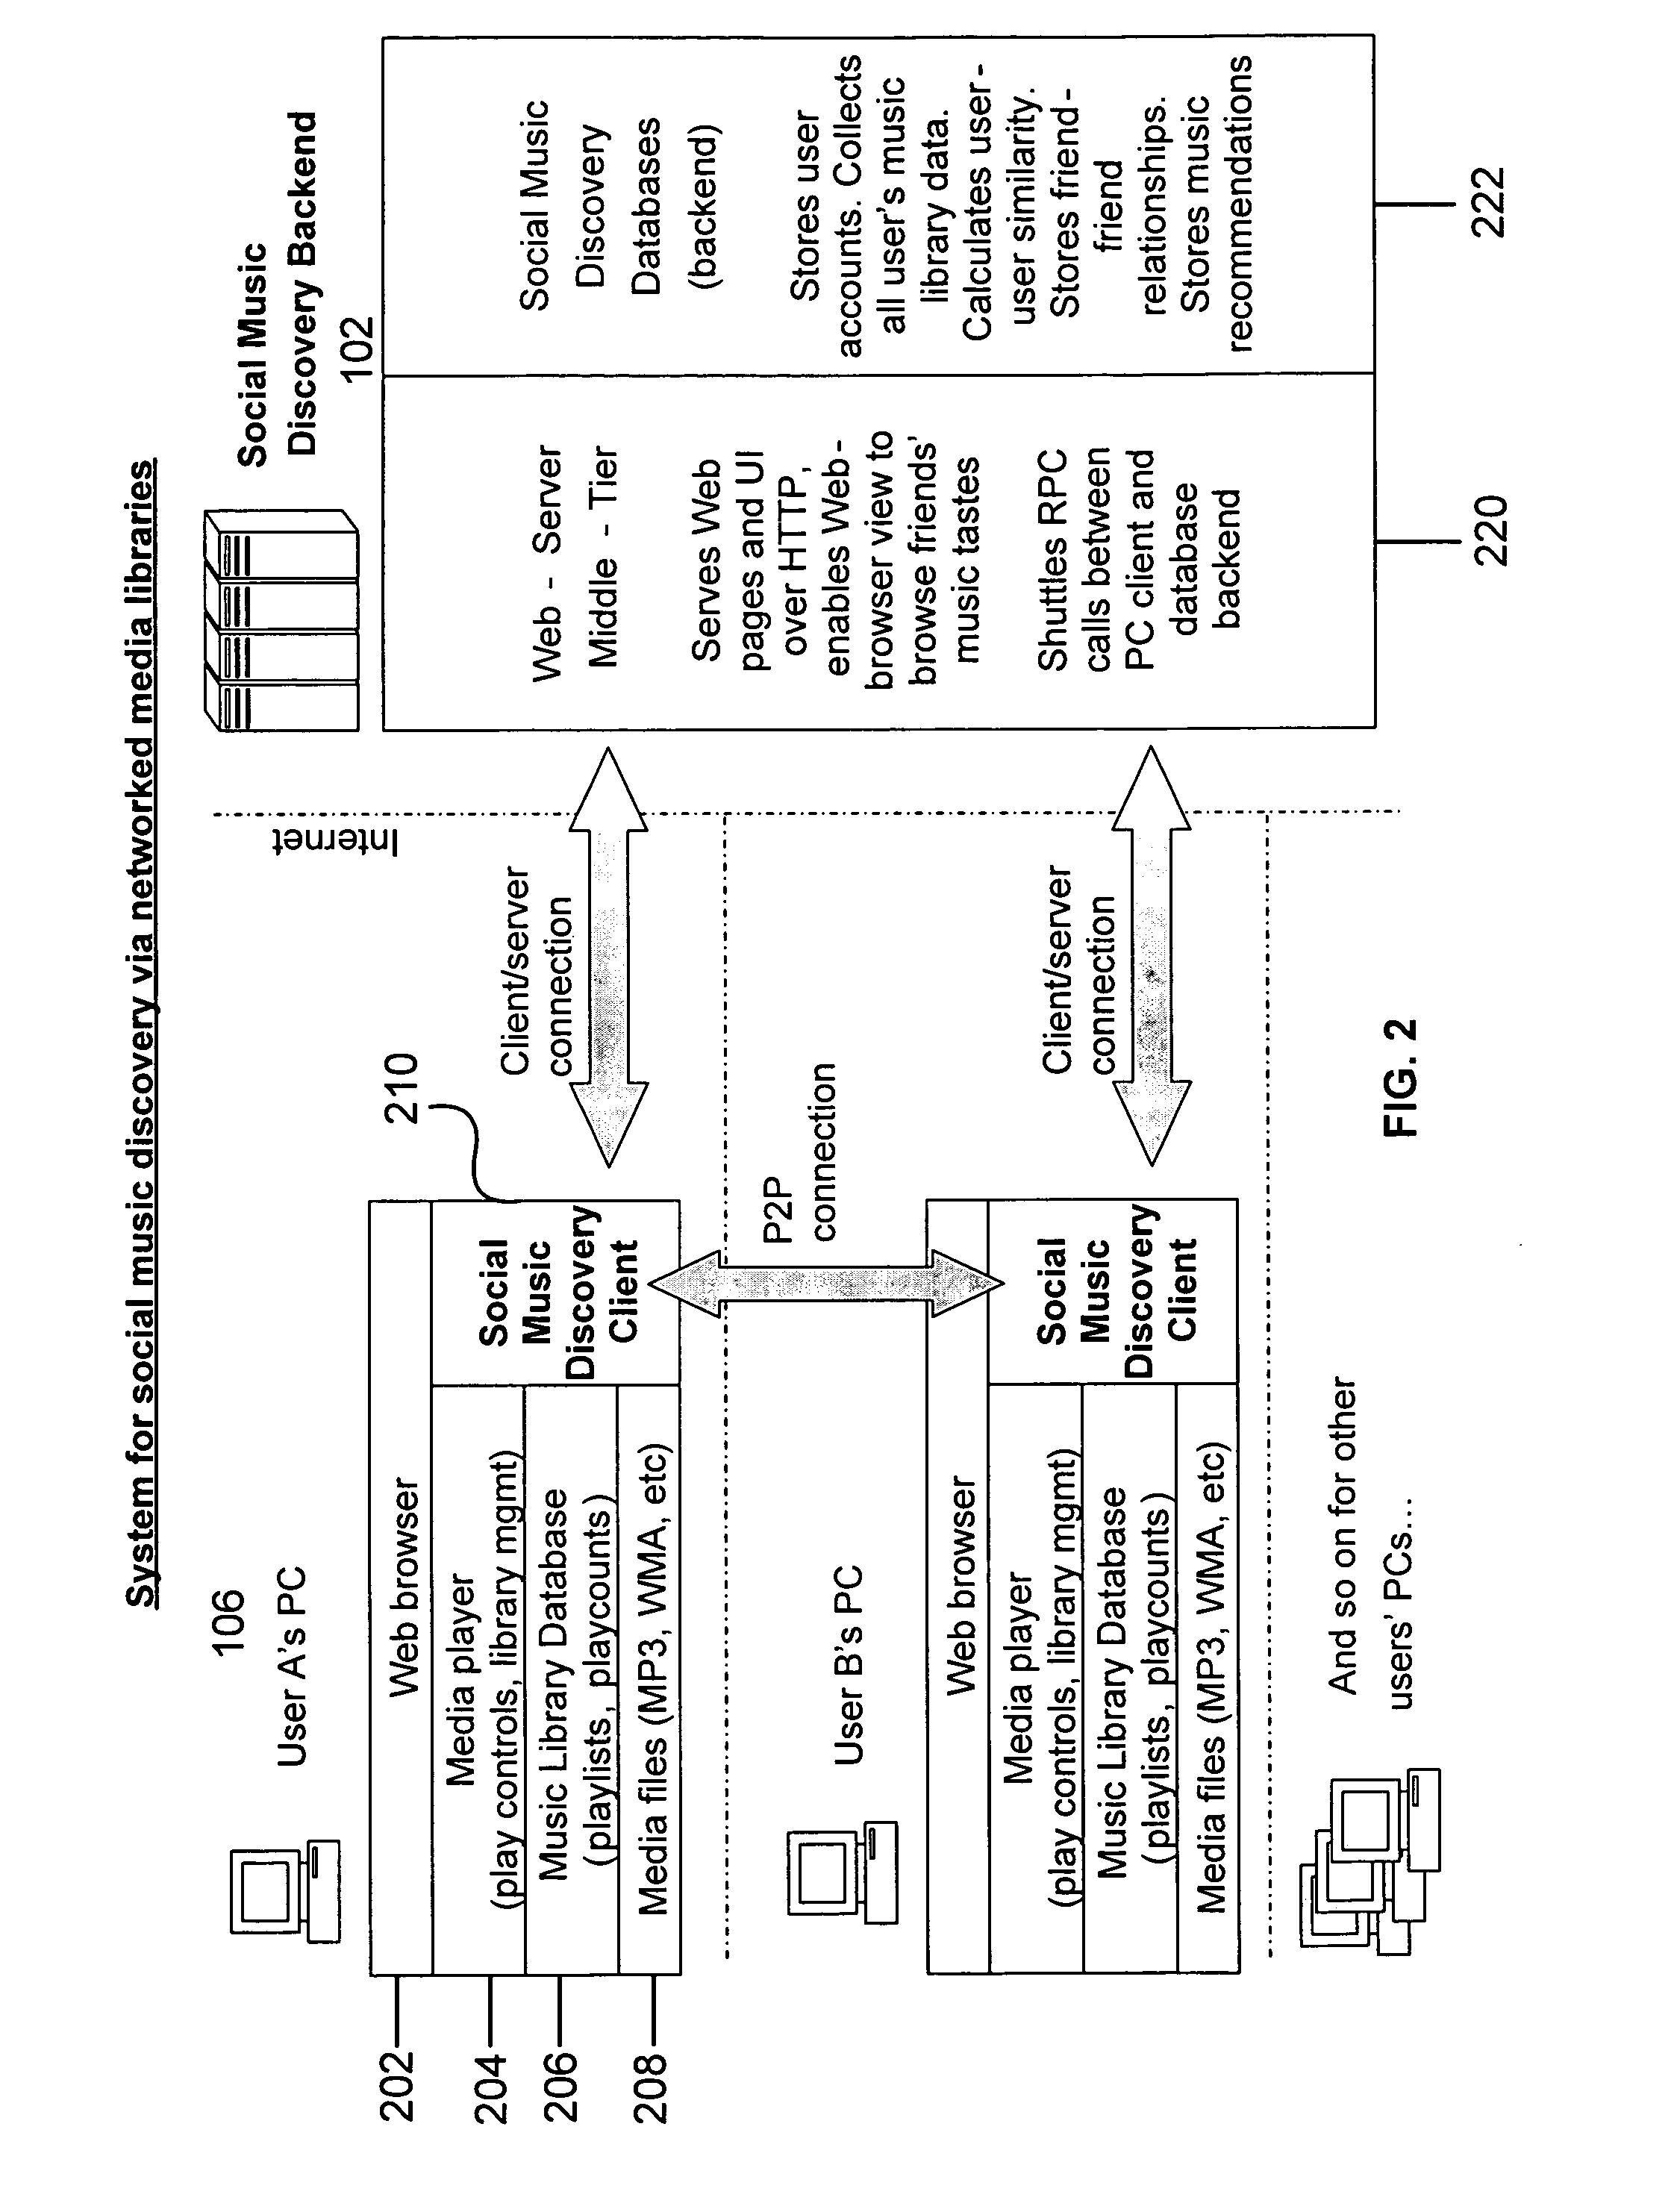 System, apparatus and method for discovery of music within a social network